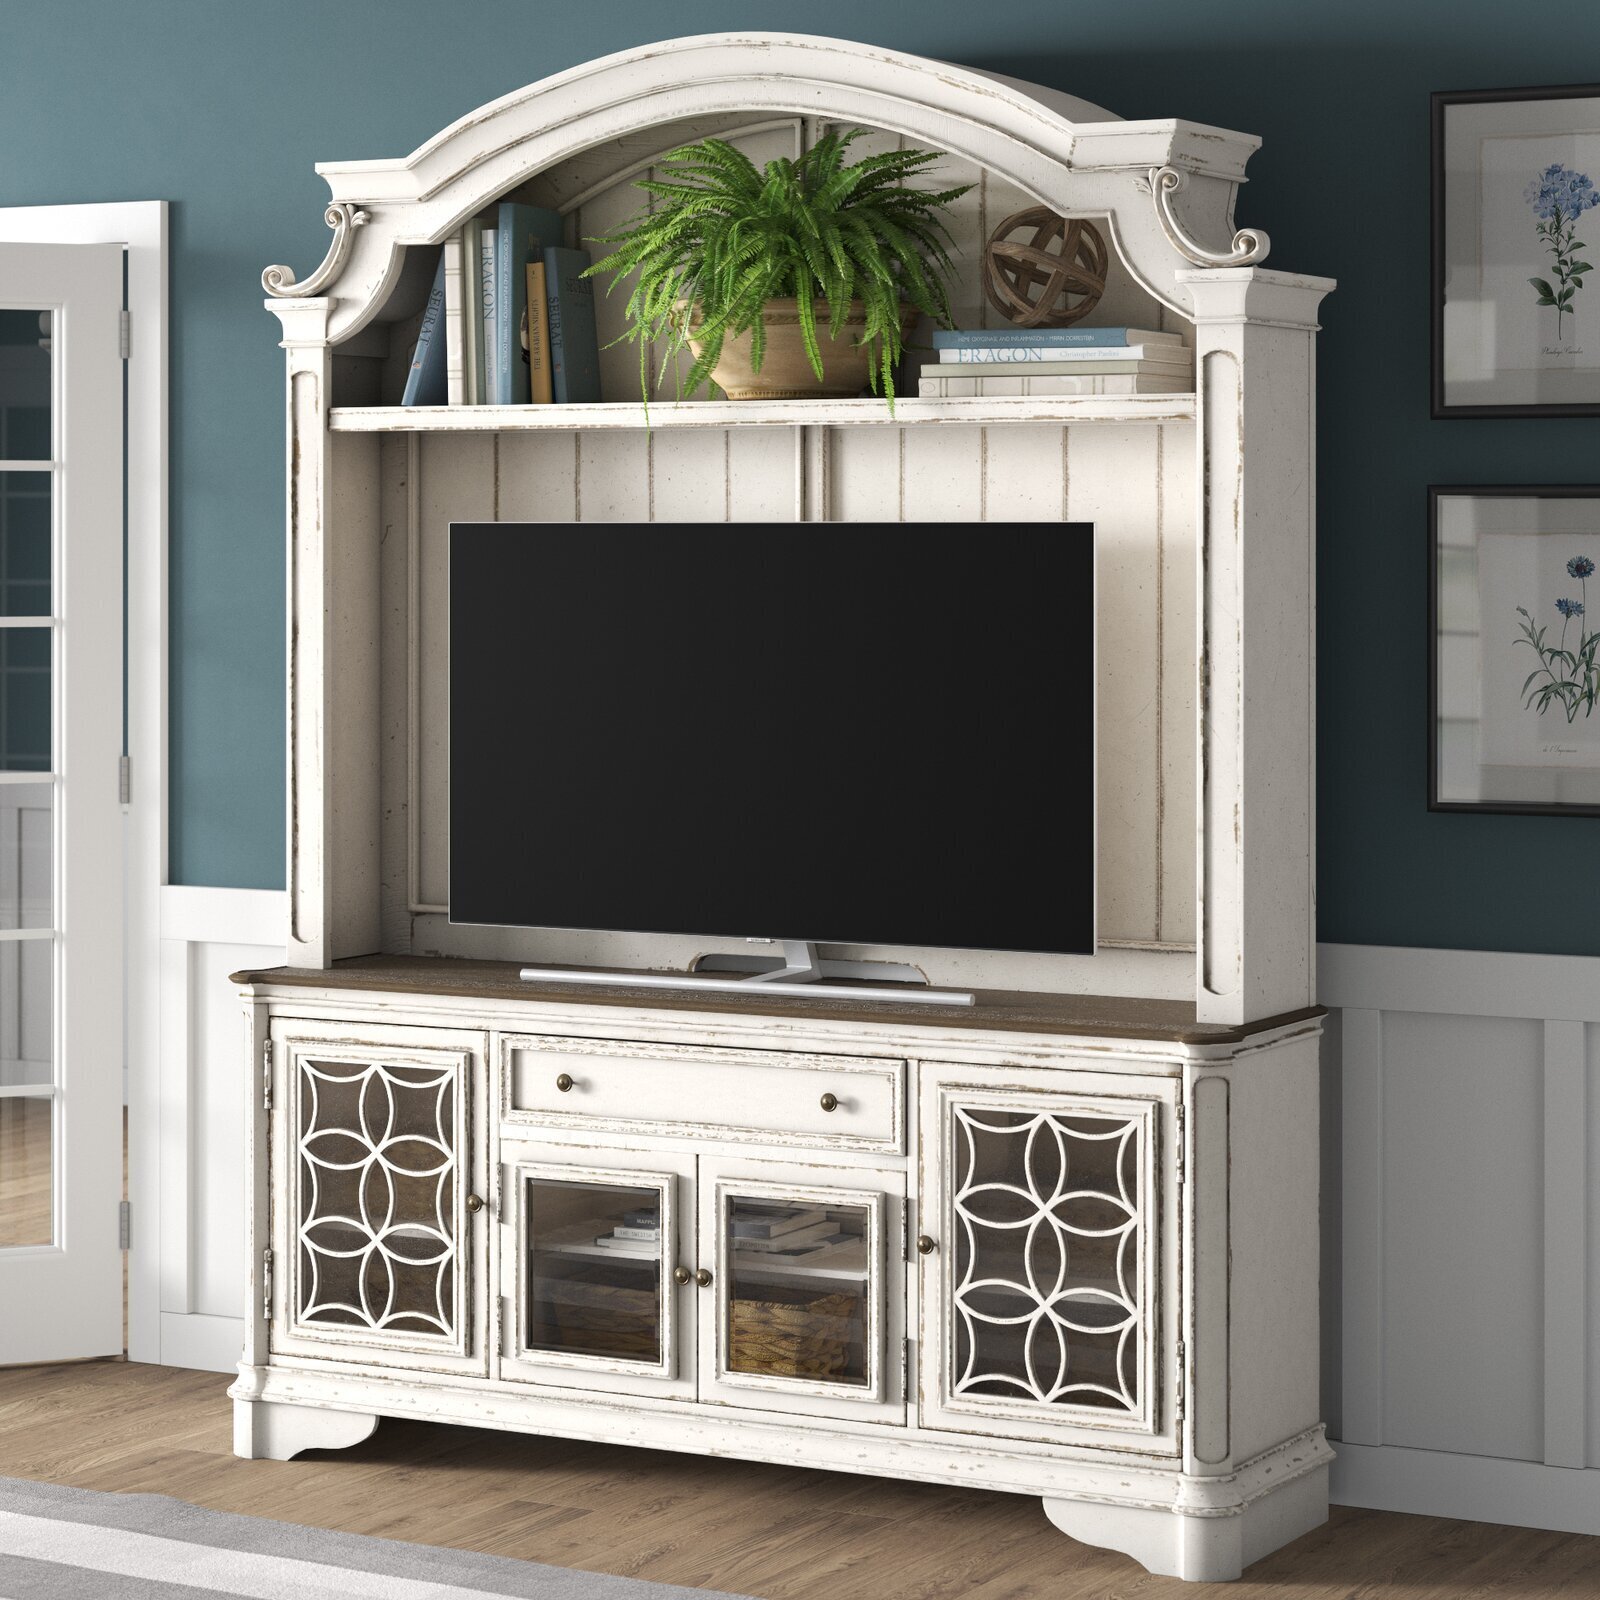 Entertainment Center with Architectural Details